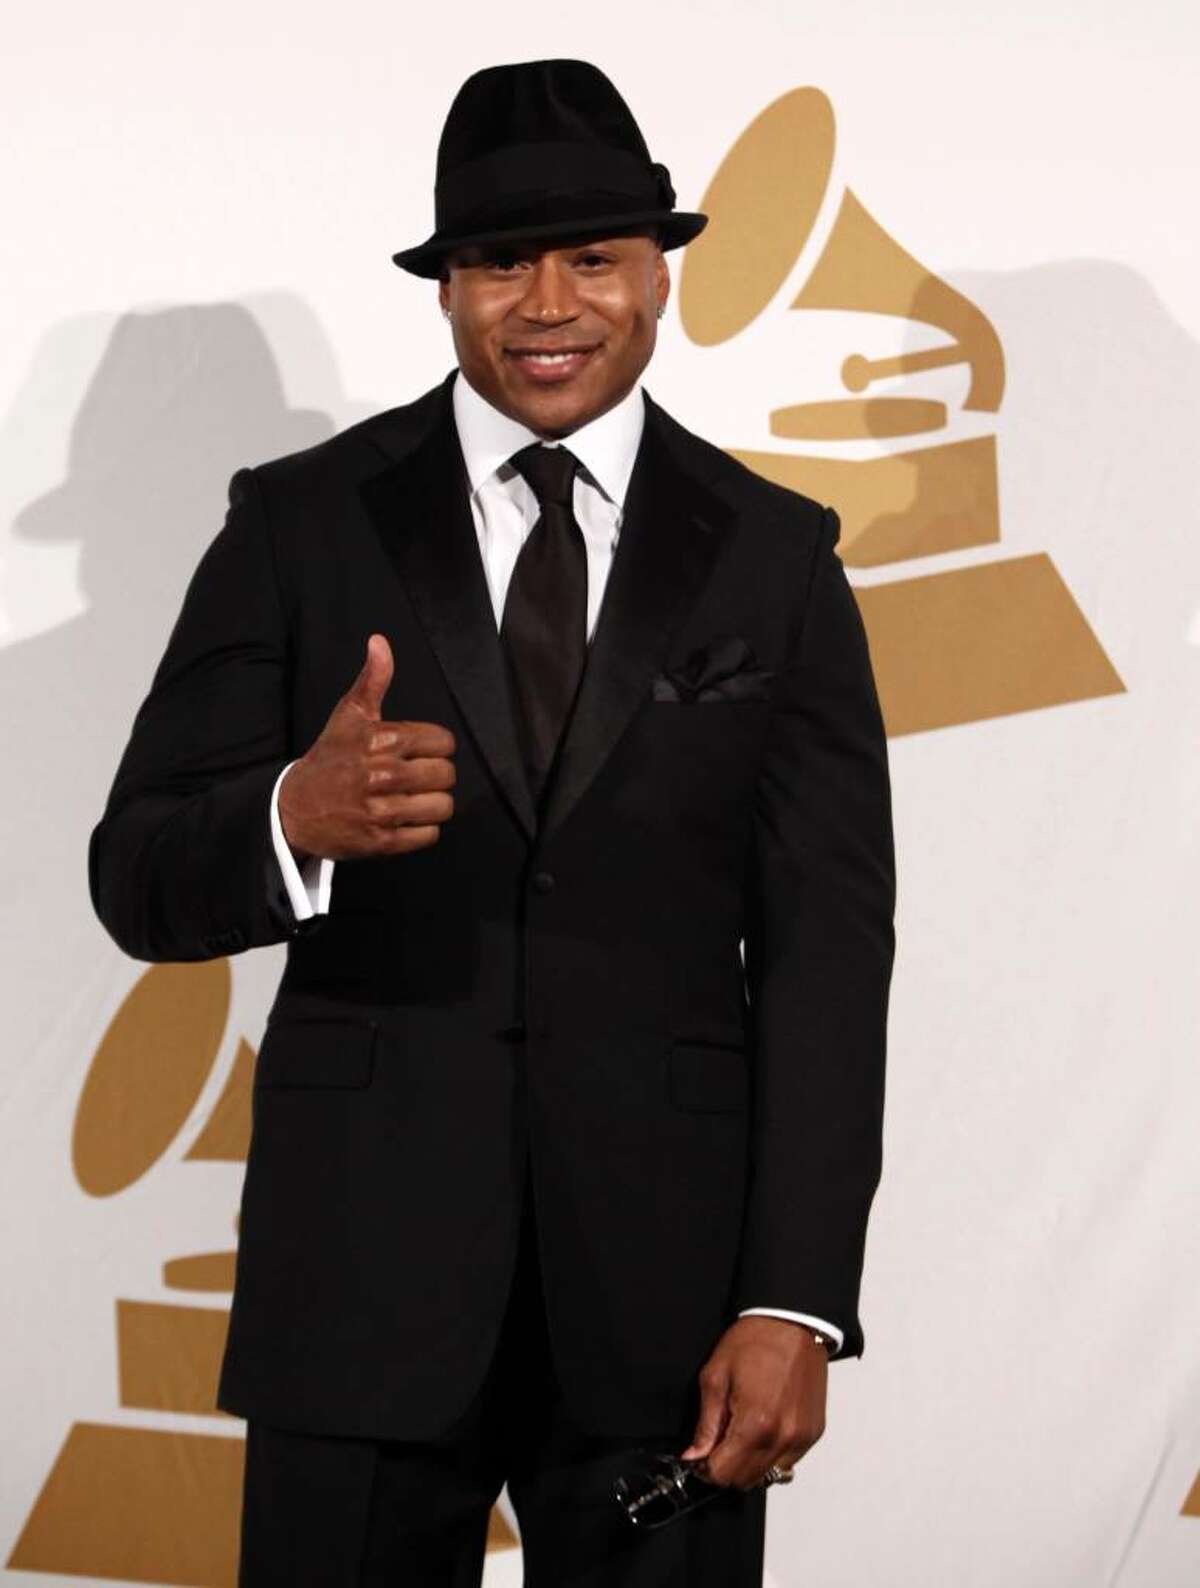 LL Cool J is seen backstage at the Grammy Nominations Concert on Wednesday, Dec. 2, 2009, in Los Angeles. (AP Photo/Matt Sayles)